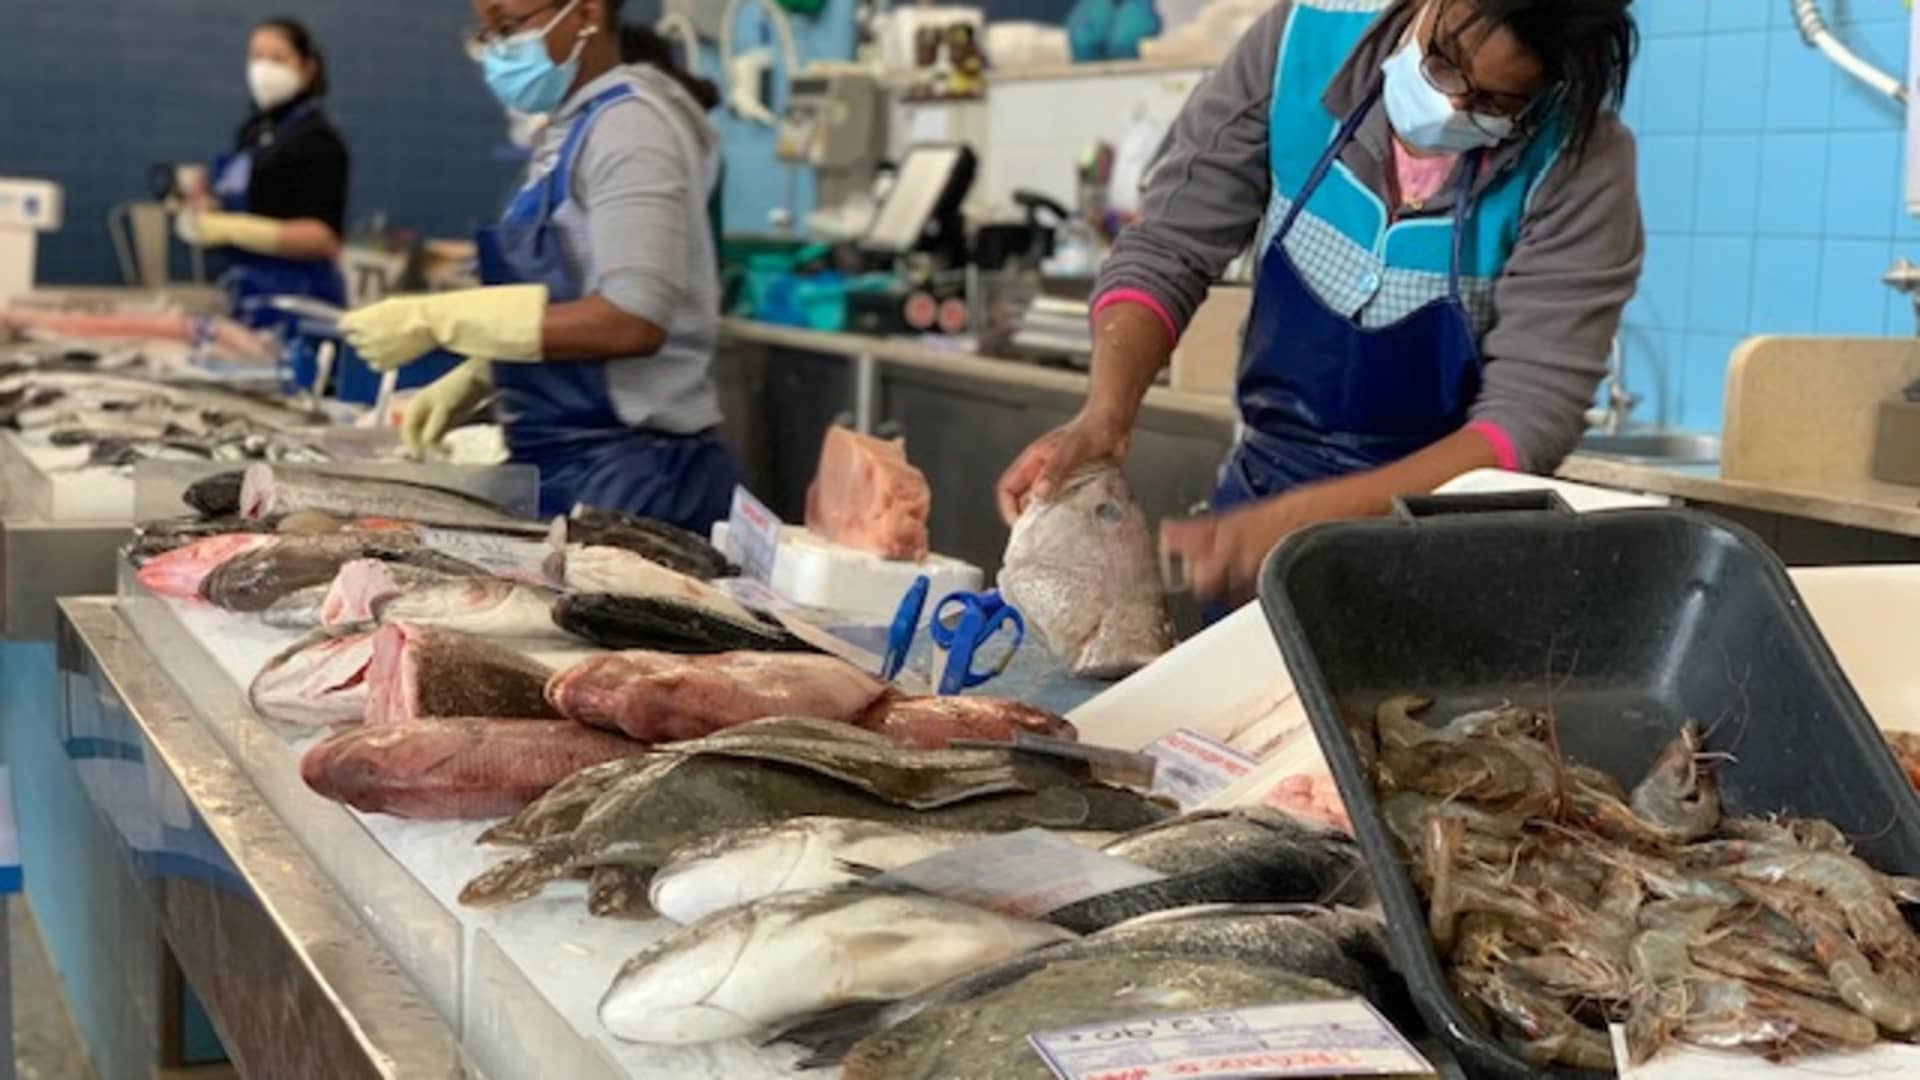 Portugal is famous for its delicious seafood, and you can find some of the freshest at the Mercado de Campo de Ourique. If you don't feel like cooking, several of the restaurant booths at the Mercado pick their seafood supplies from the fish counter.